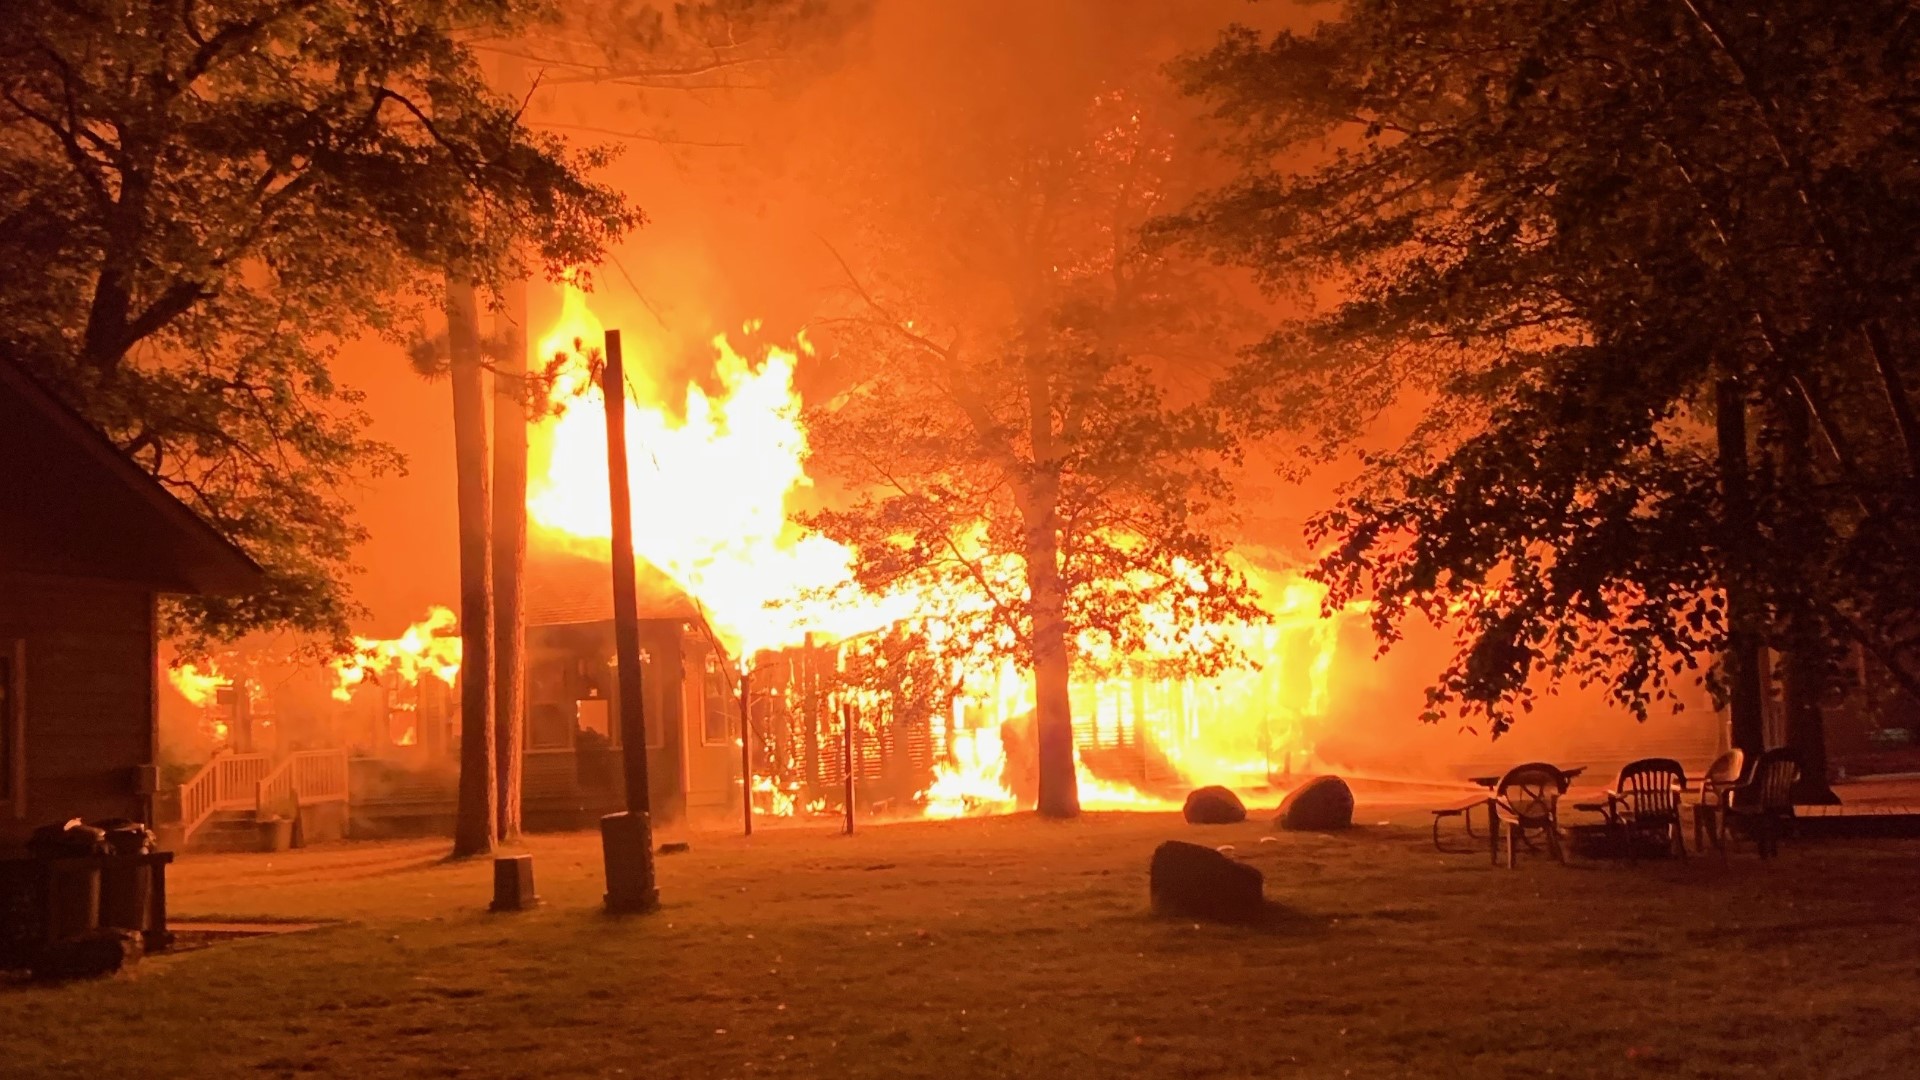 The owners of the Cass Lake Lodge say their main lodge building and 'Mega-cabin' were destroyed in a raging fire Tuesday evening.